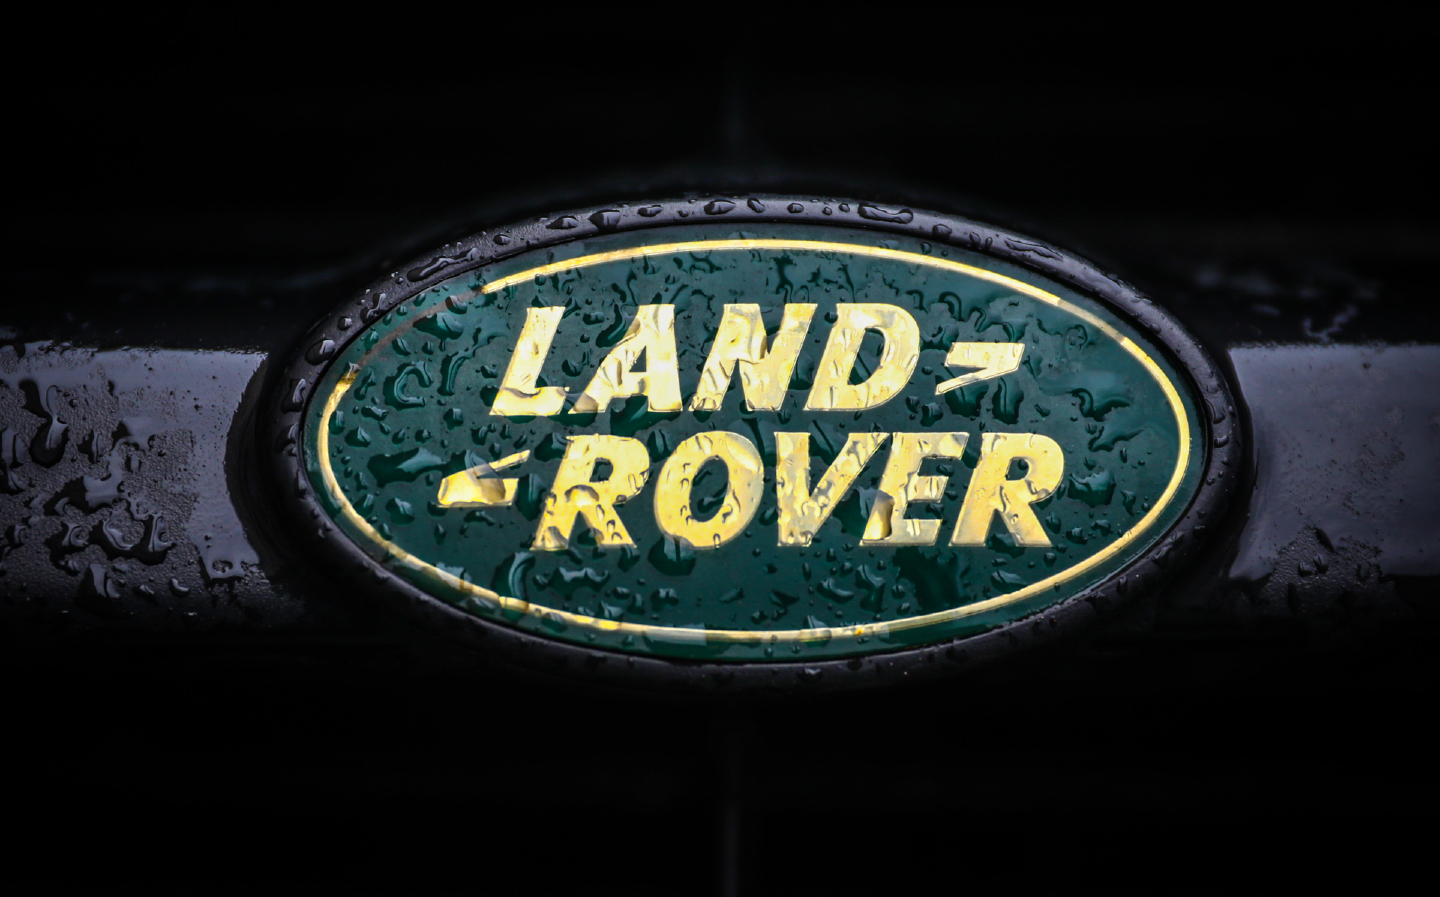 Land Rover brand will not be killed off, says spokesperson